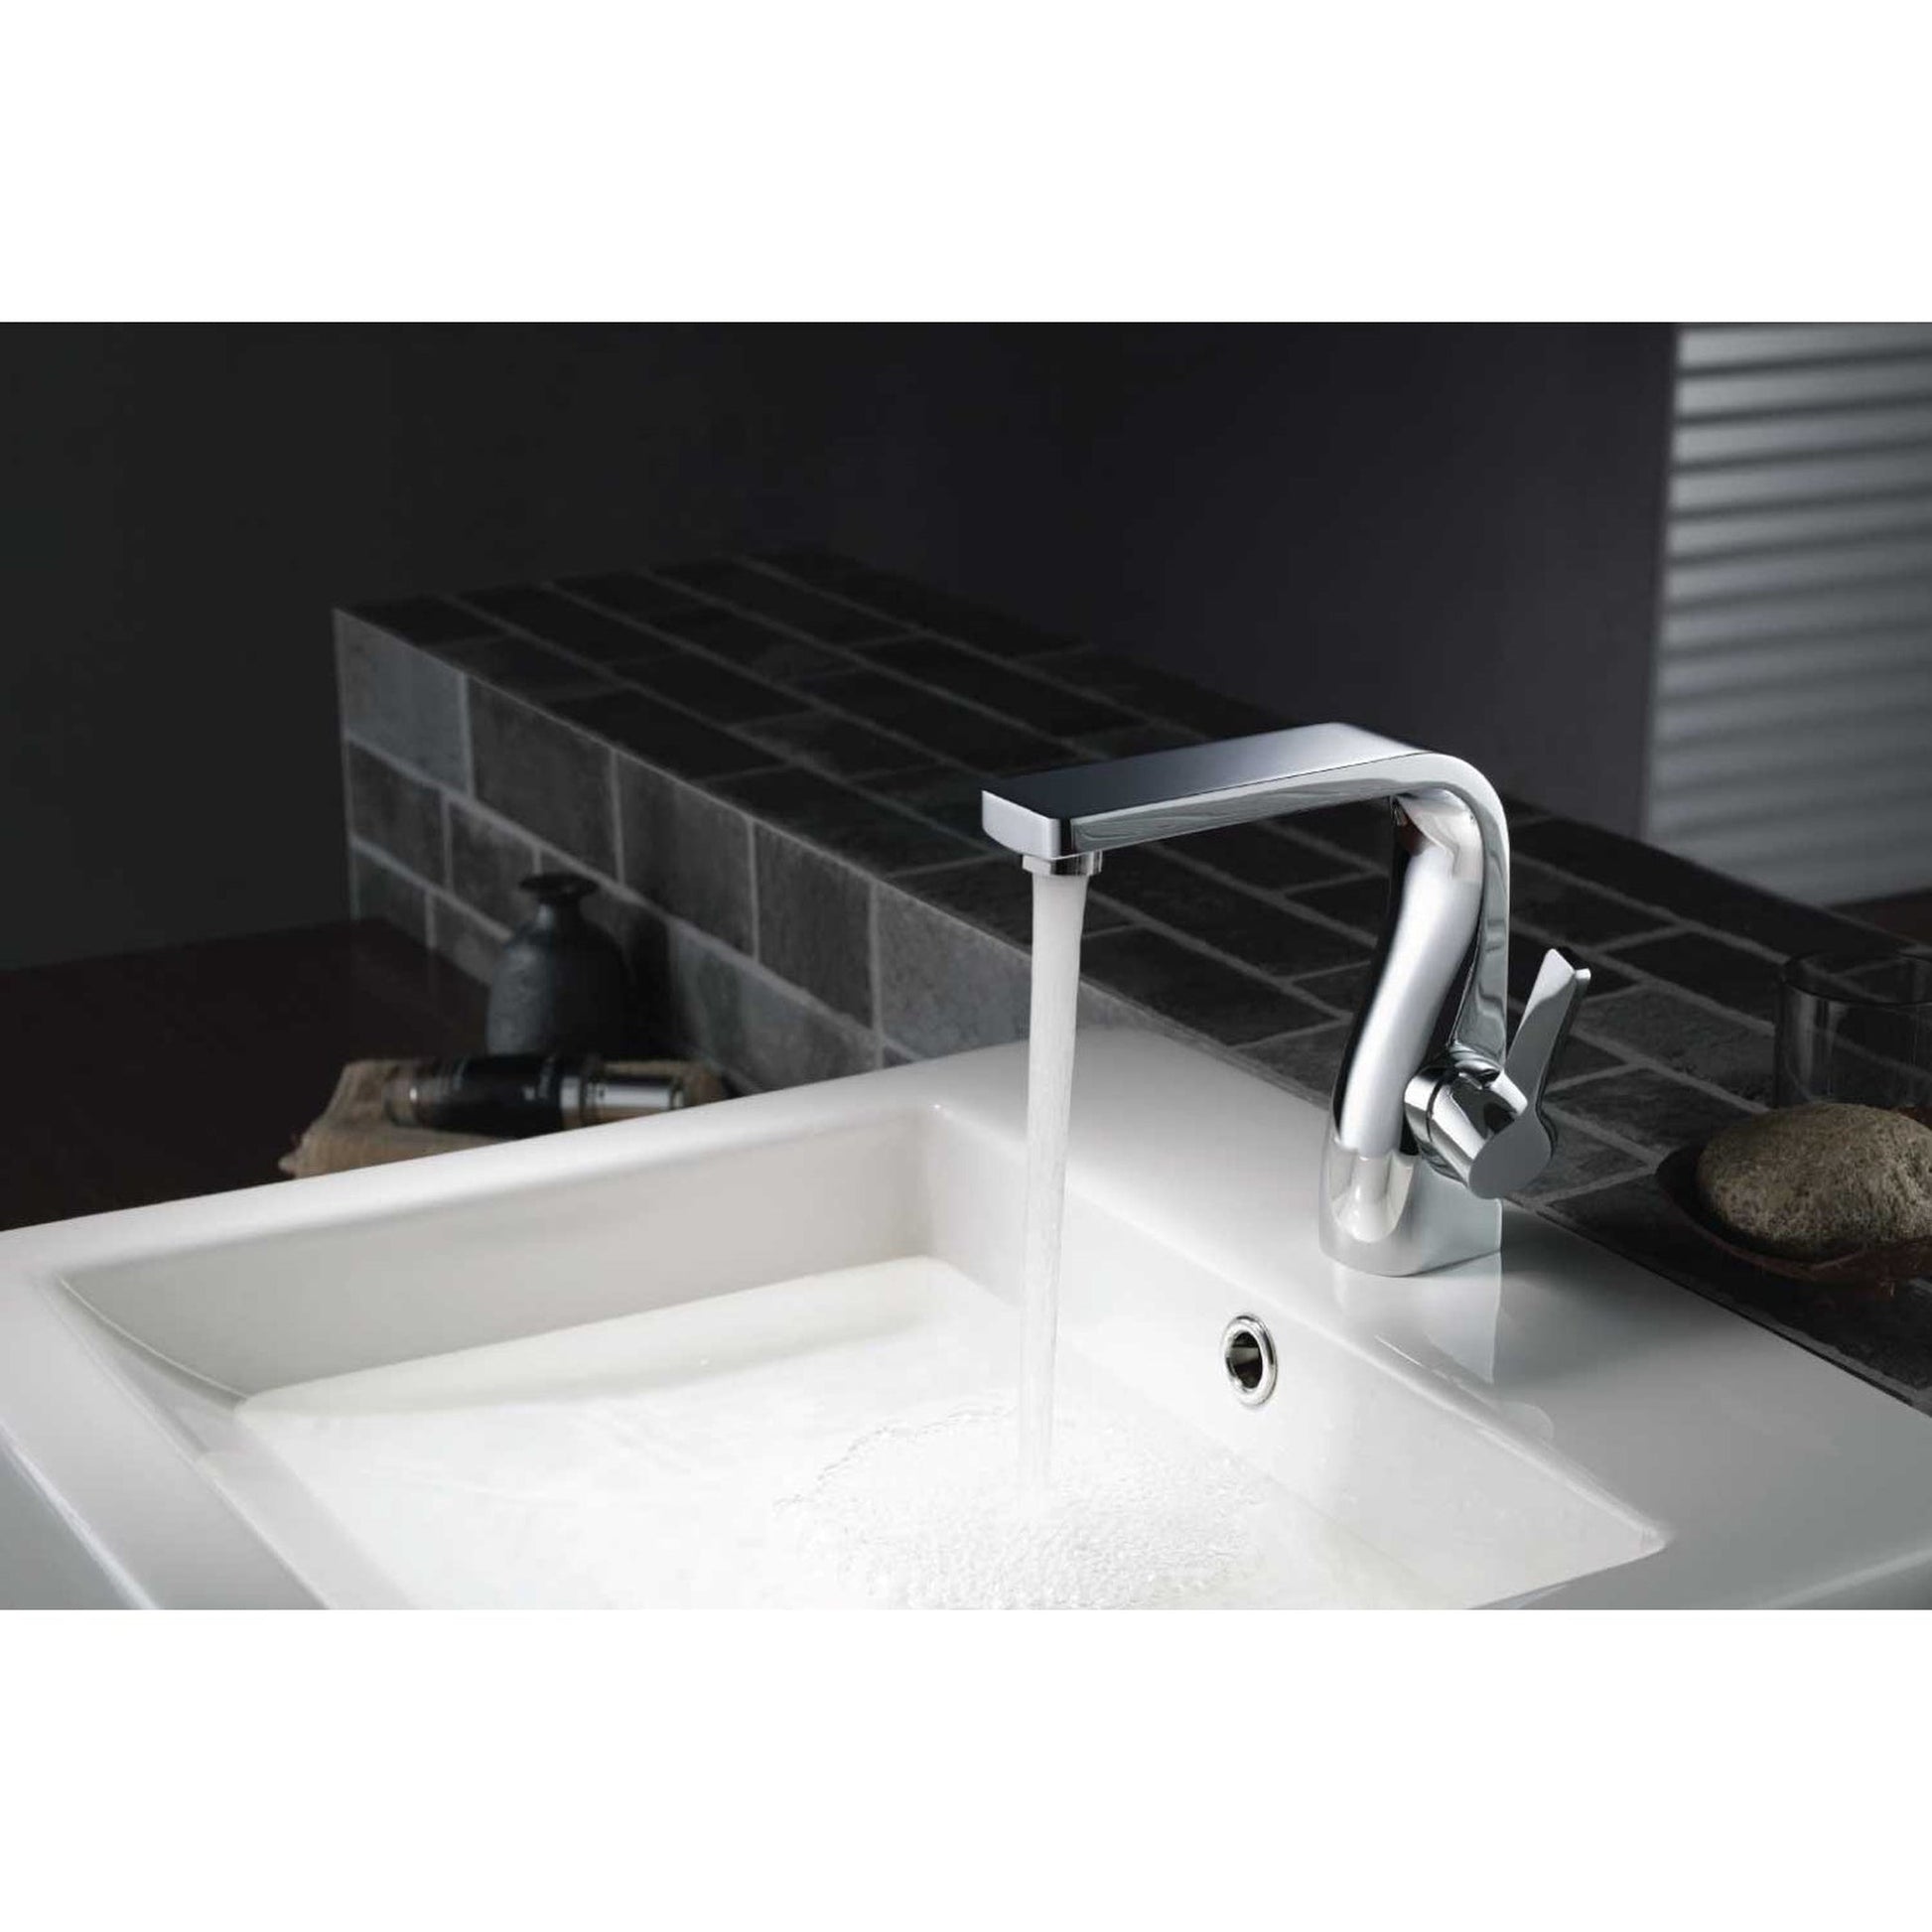 Isenberg Serie 260 6" Single-Hole Polished Nickel PVD Deck-Mounted Bathroom Sink Faucet With Pop-Up Drain